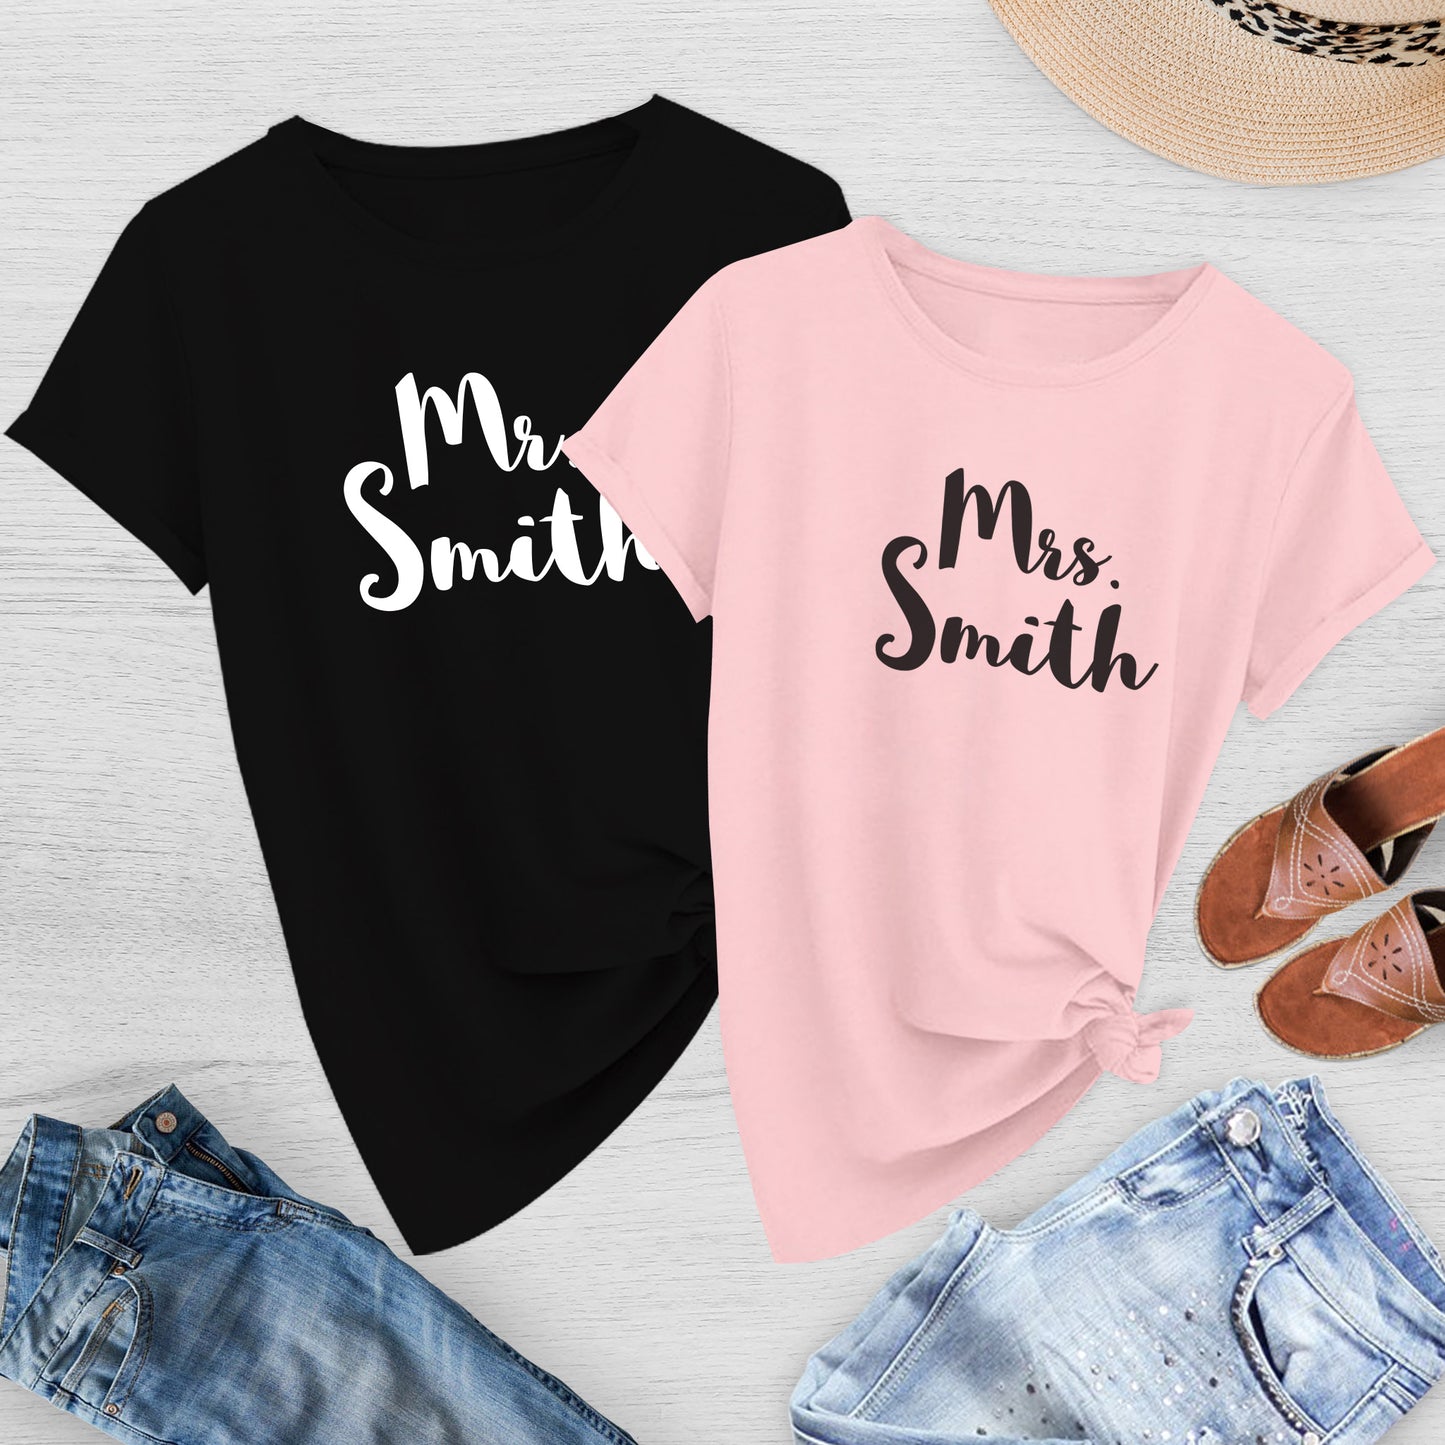 Mr and Mrs Smith Tee